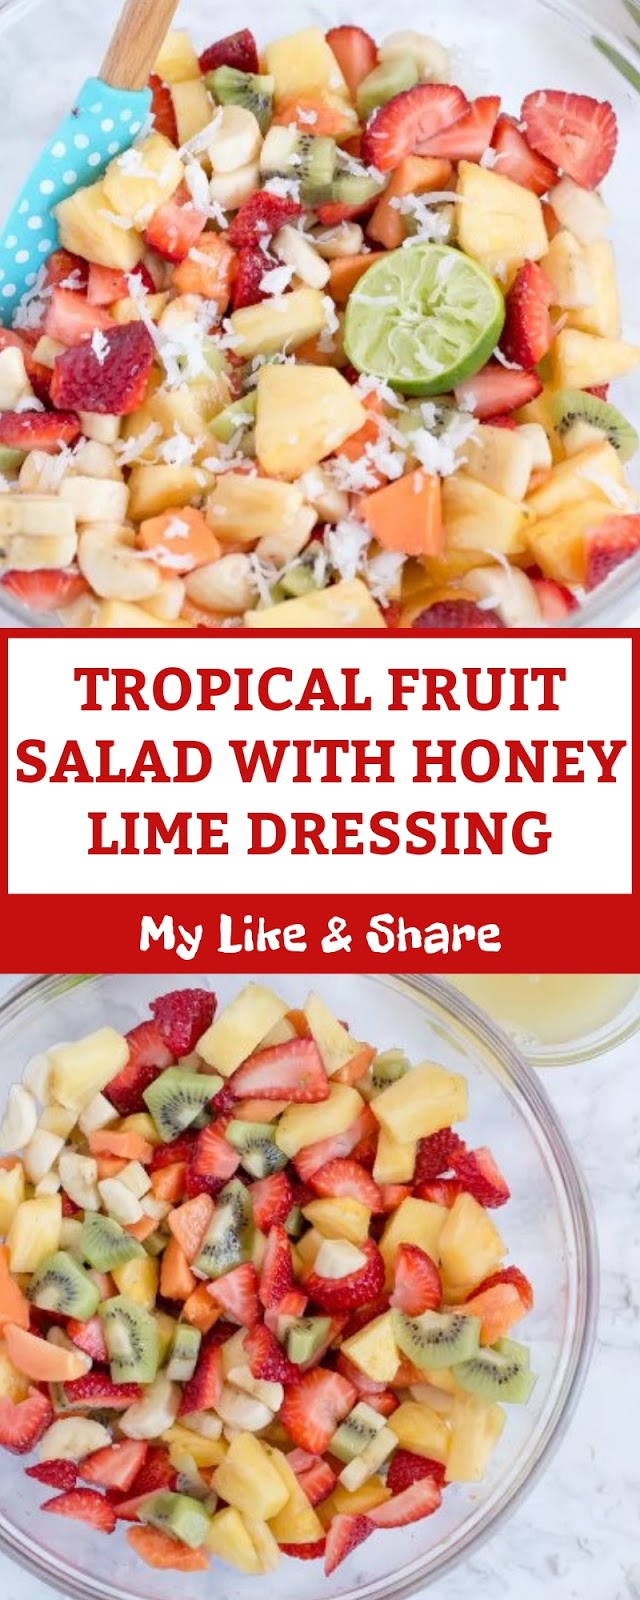 TROPICAL FRUIT SALAD WITH HONEY LIME DRESSING